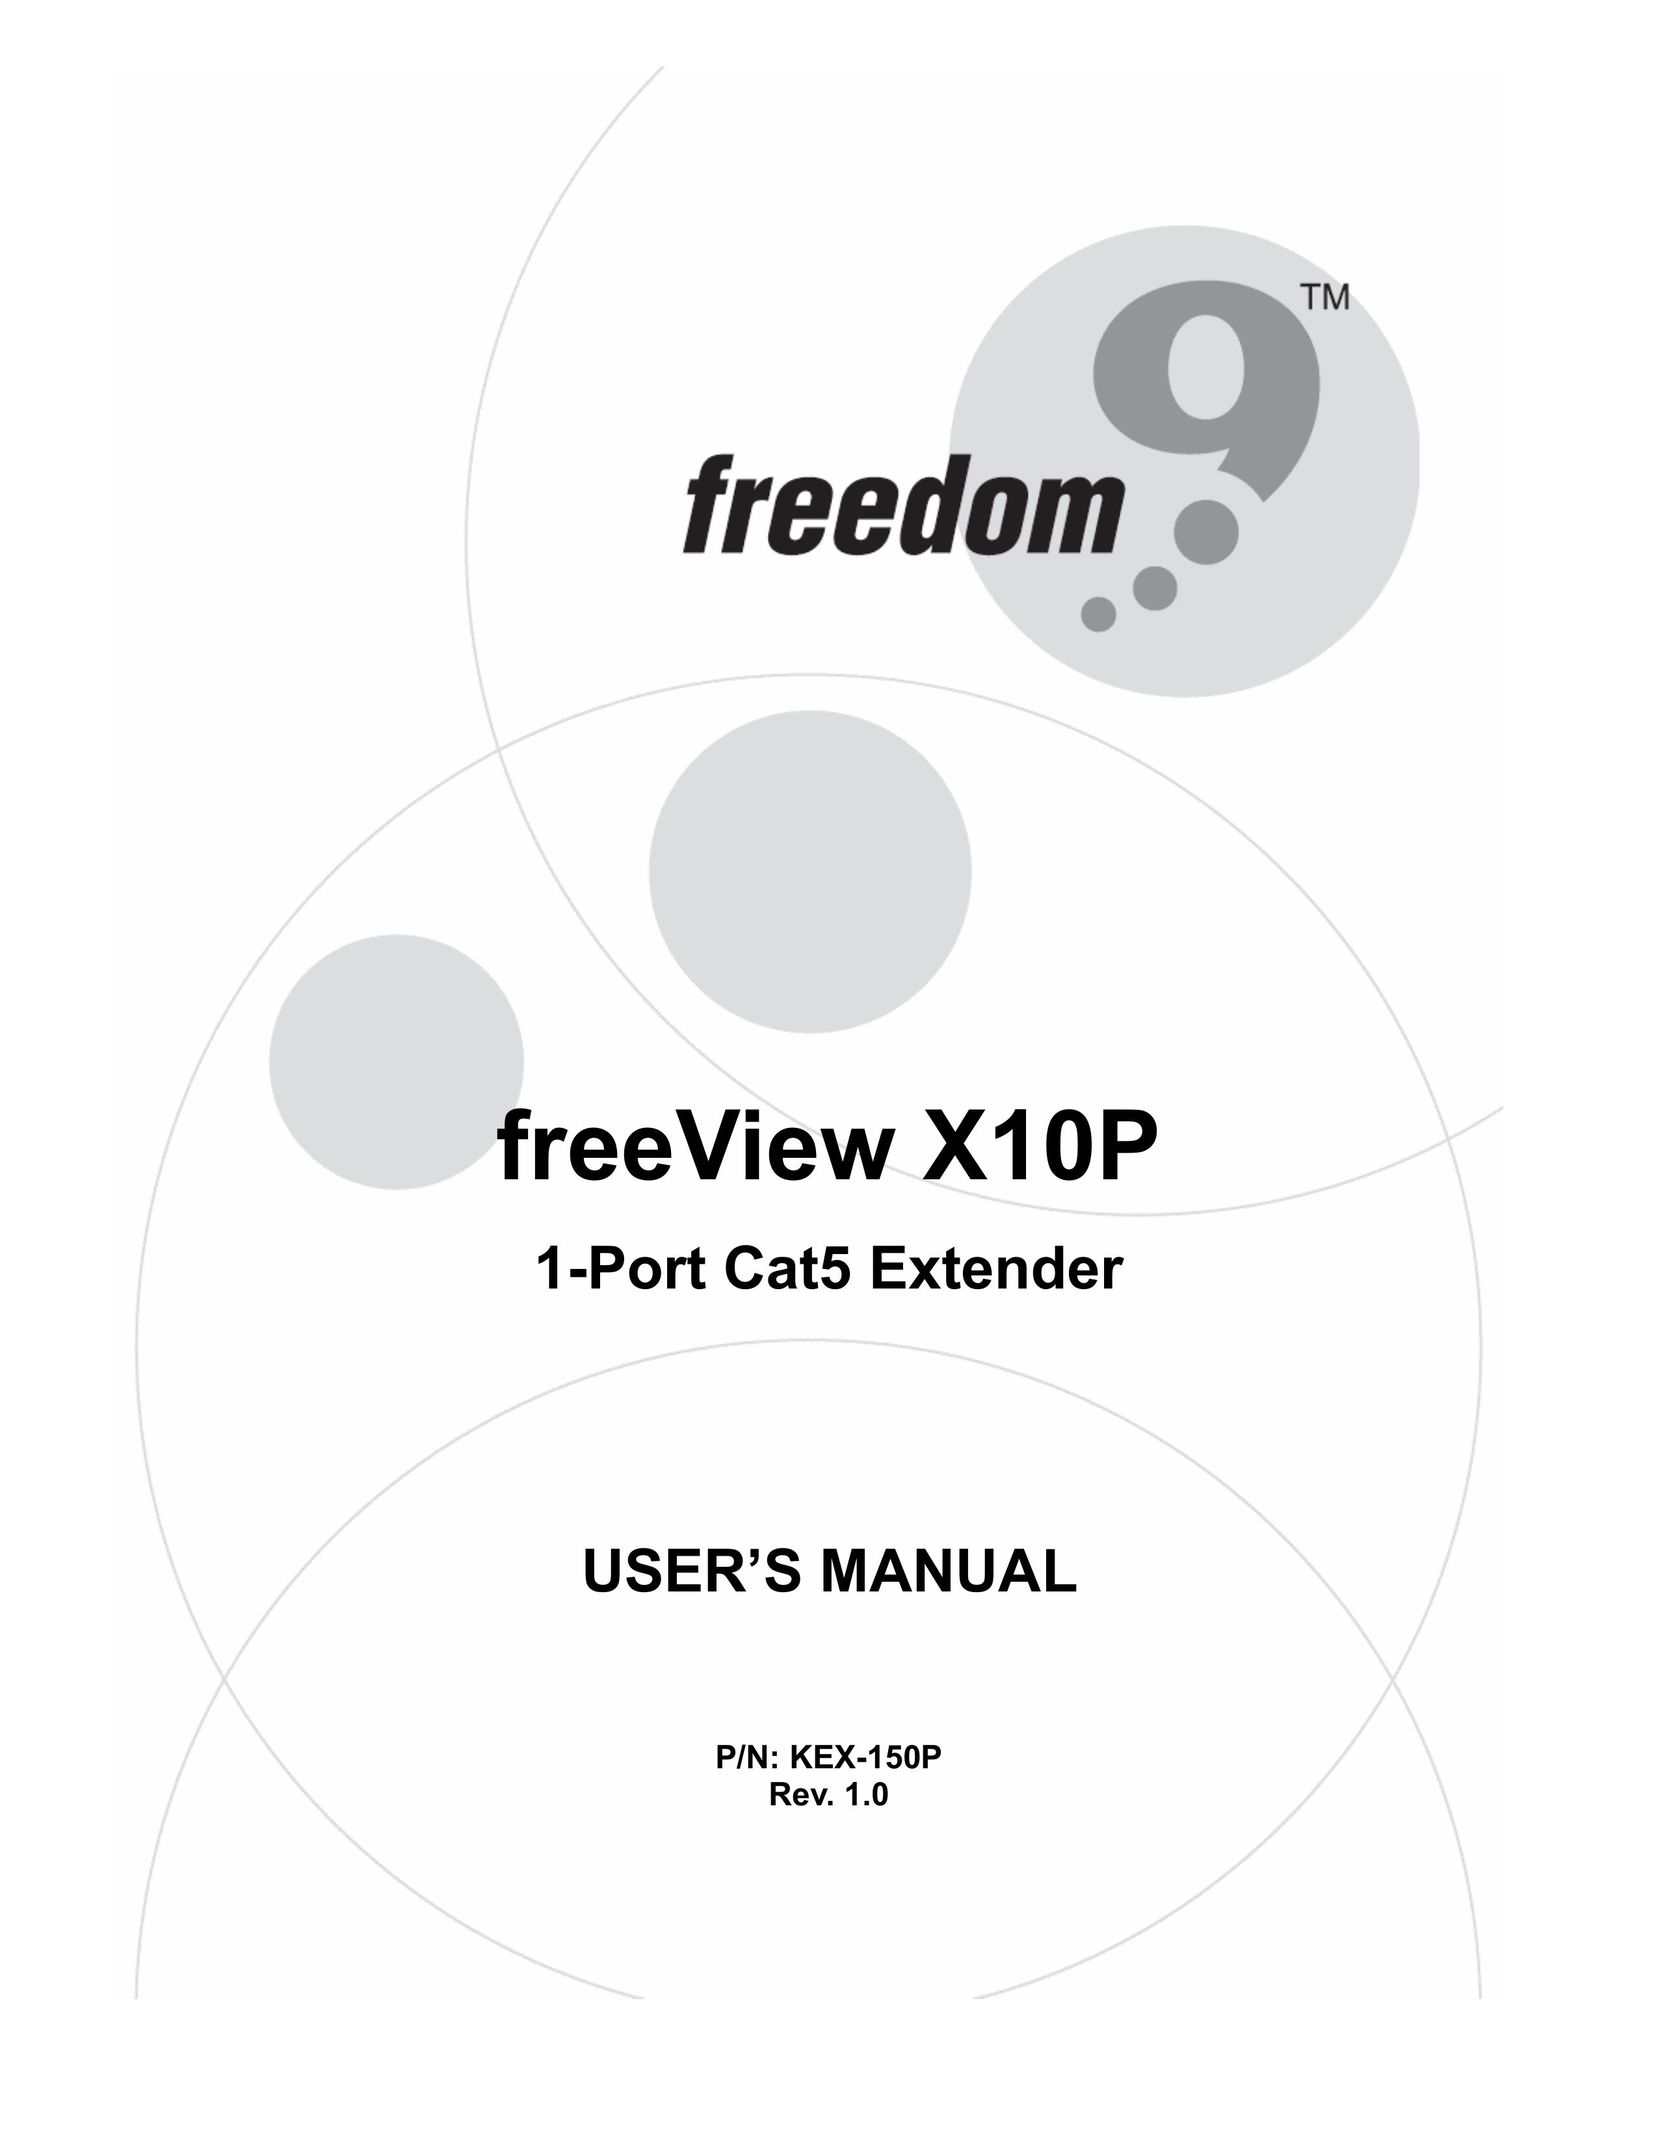 Freedom9 X10P Network Card User Manual